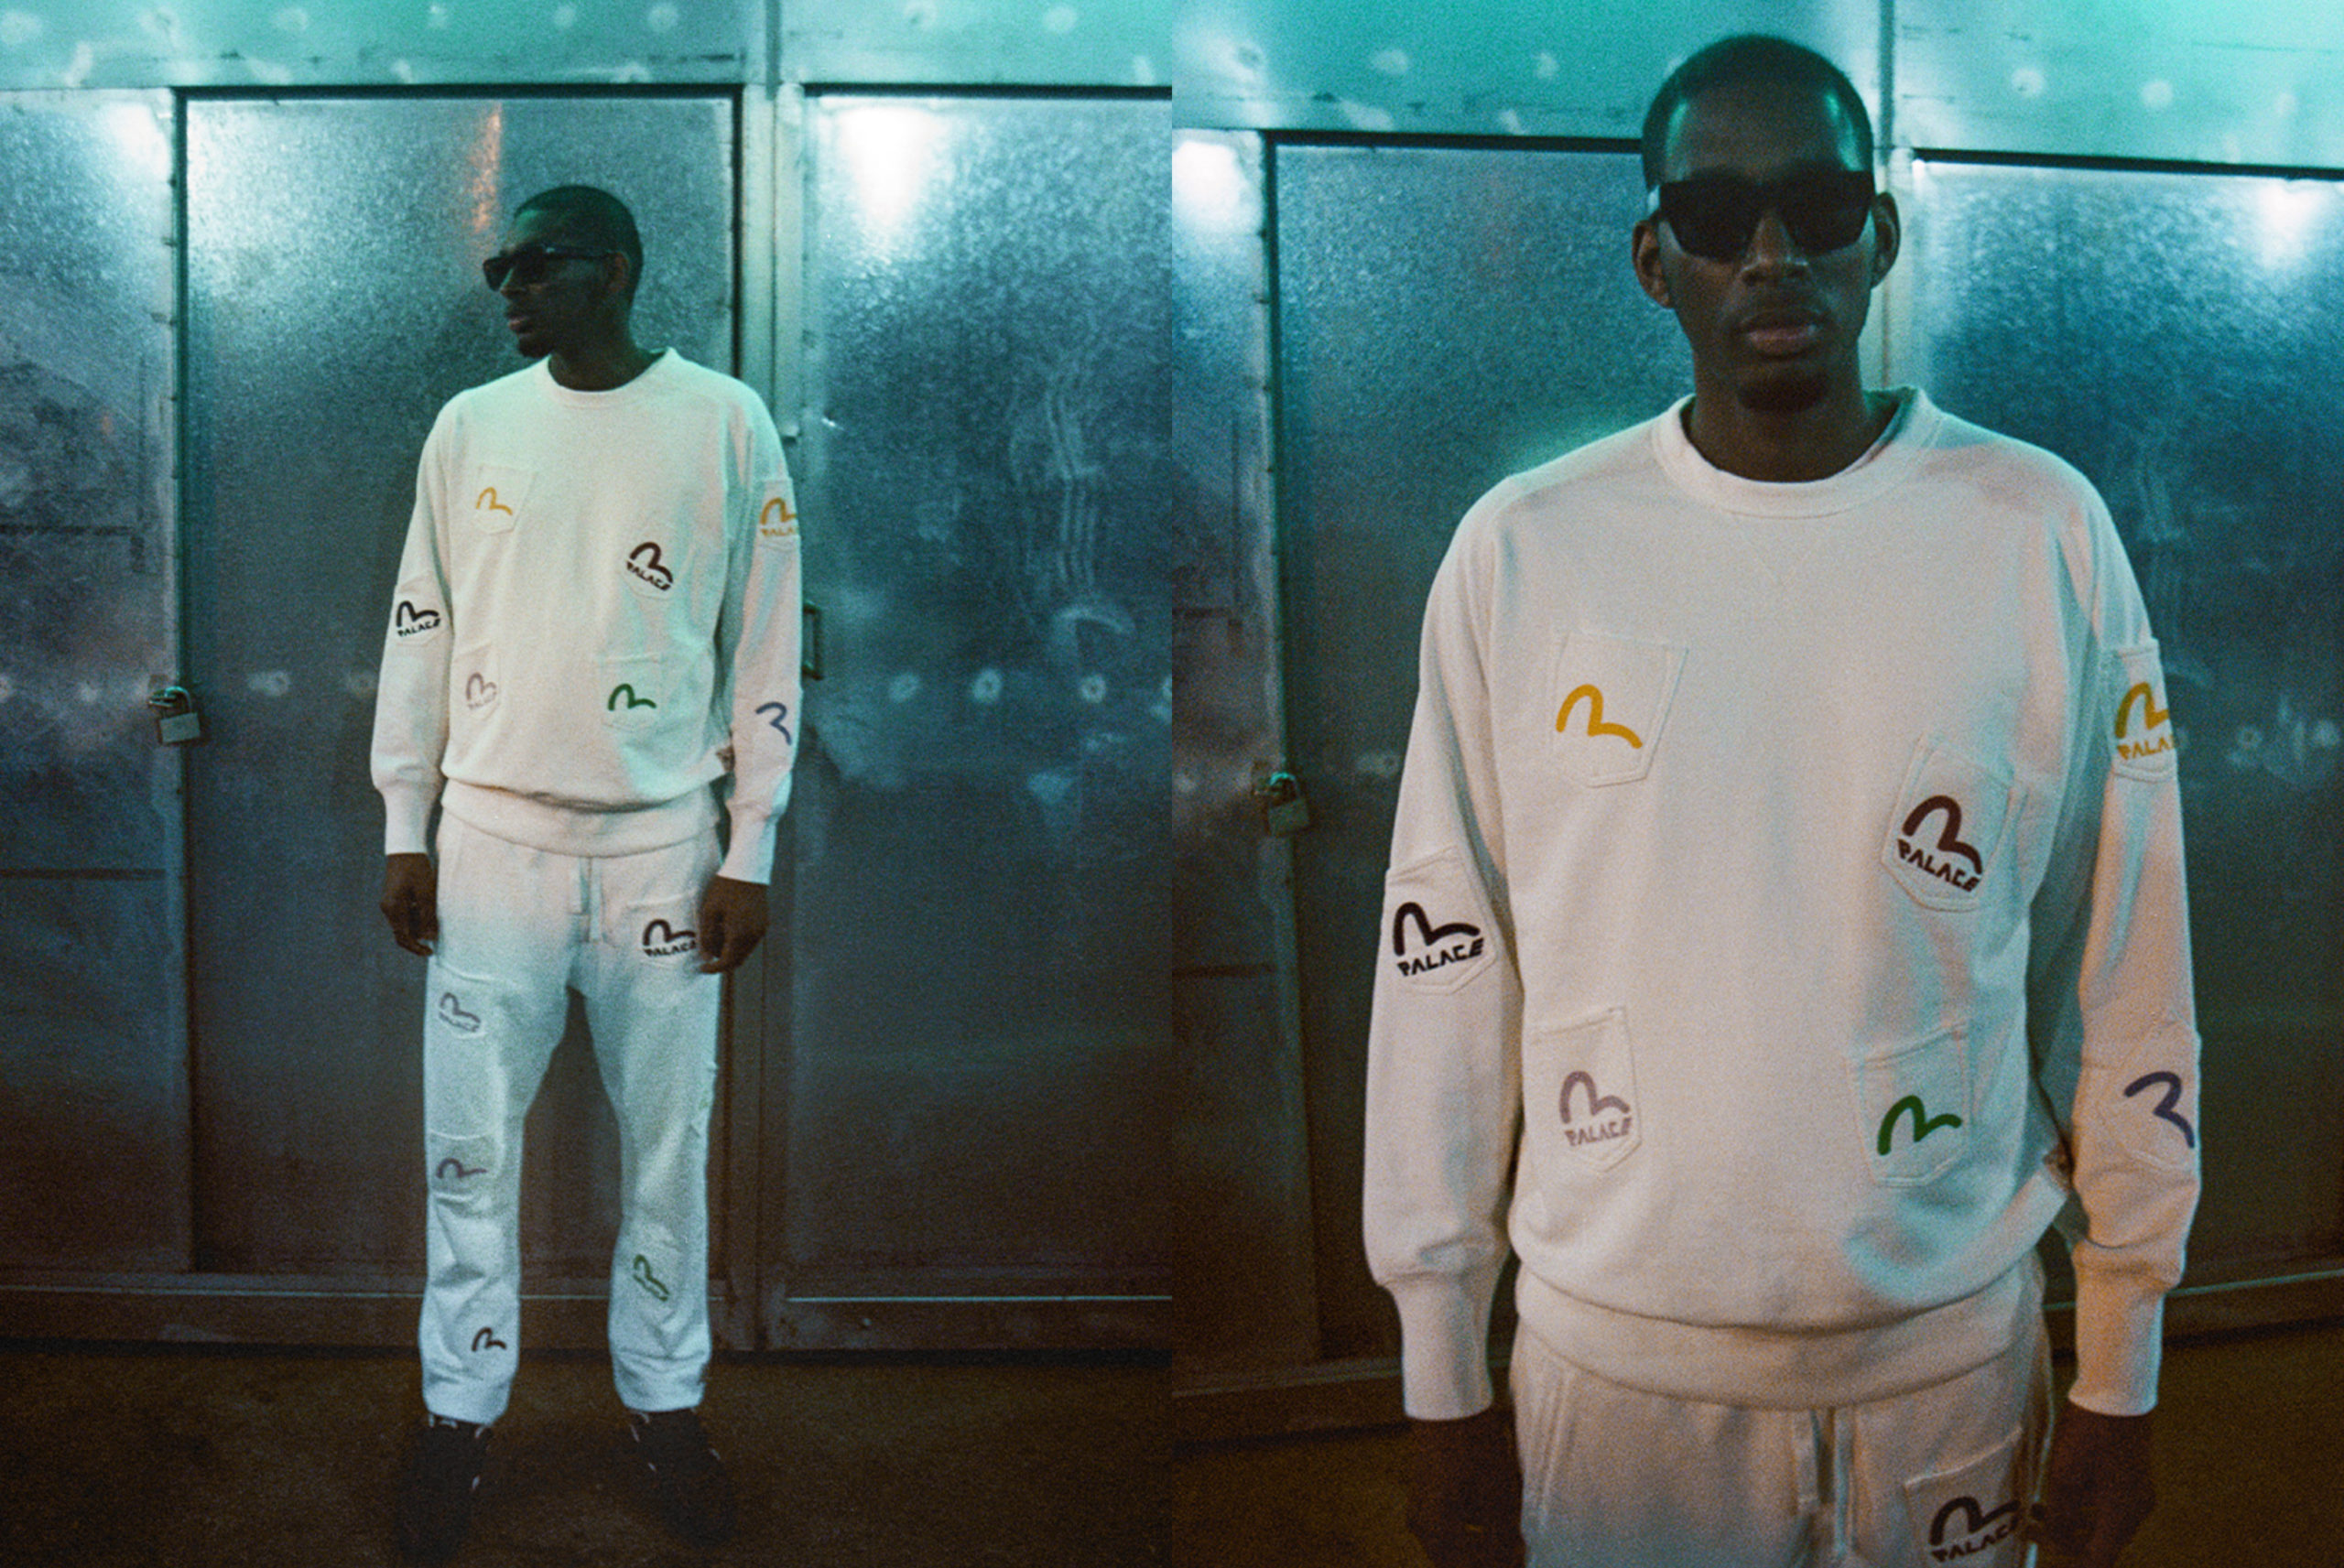 Palace and EVISU Return With Second Collaborative Collection